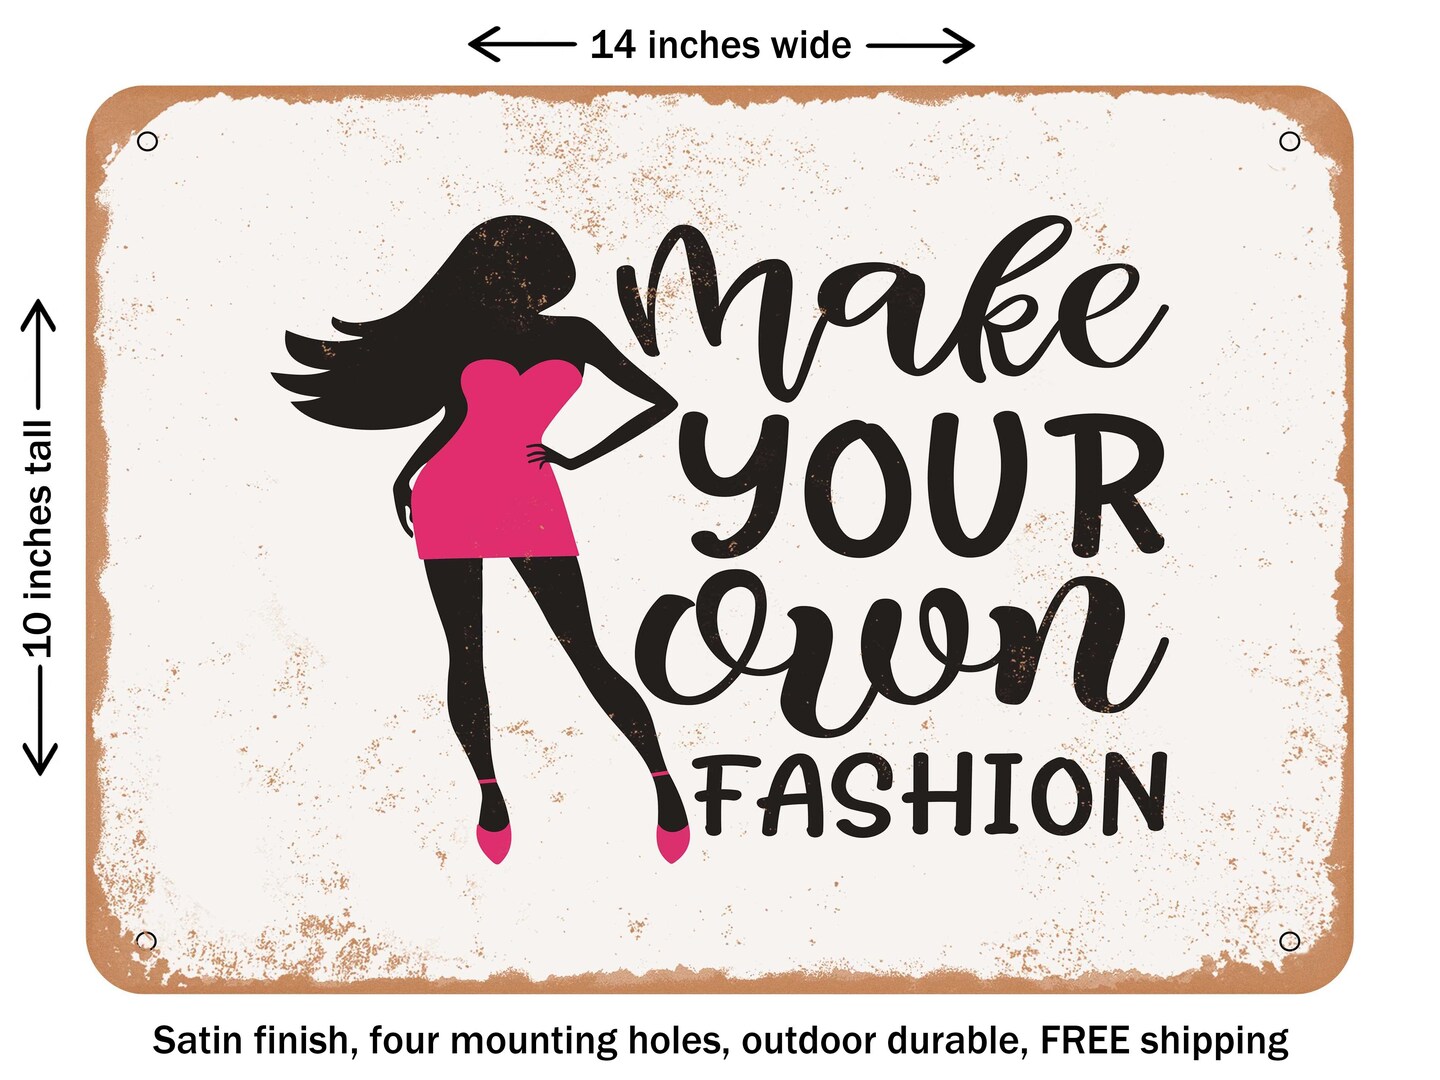 DECORATIVE METAL SIGN - Make Your Own Fashion - 2 - Vintage Rusty Look